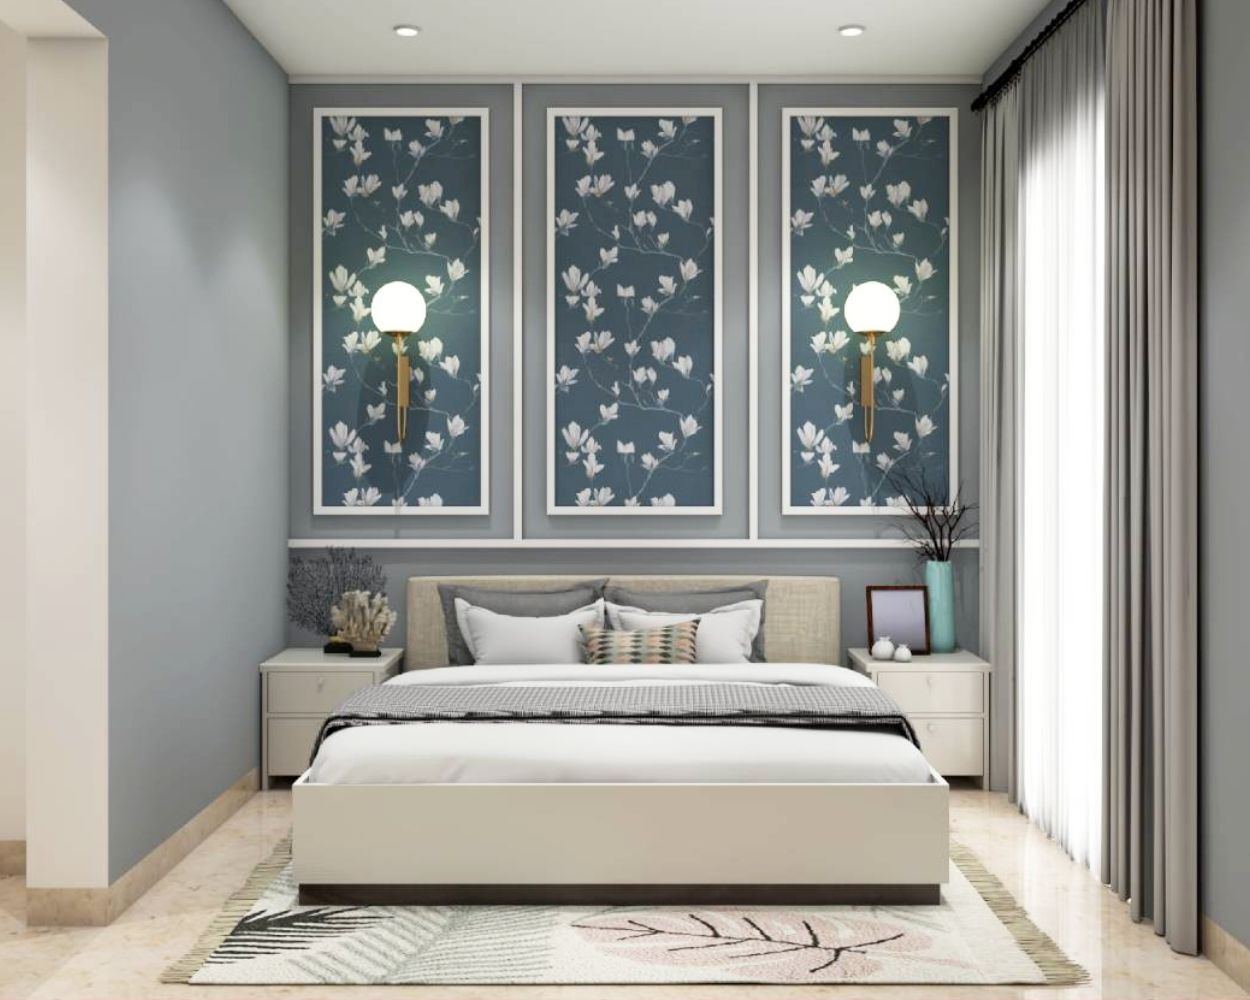 Modern Grey Guest Room Design With Floral Wallpaper